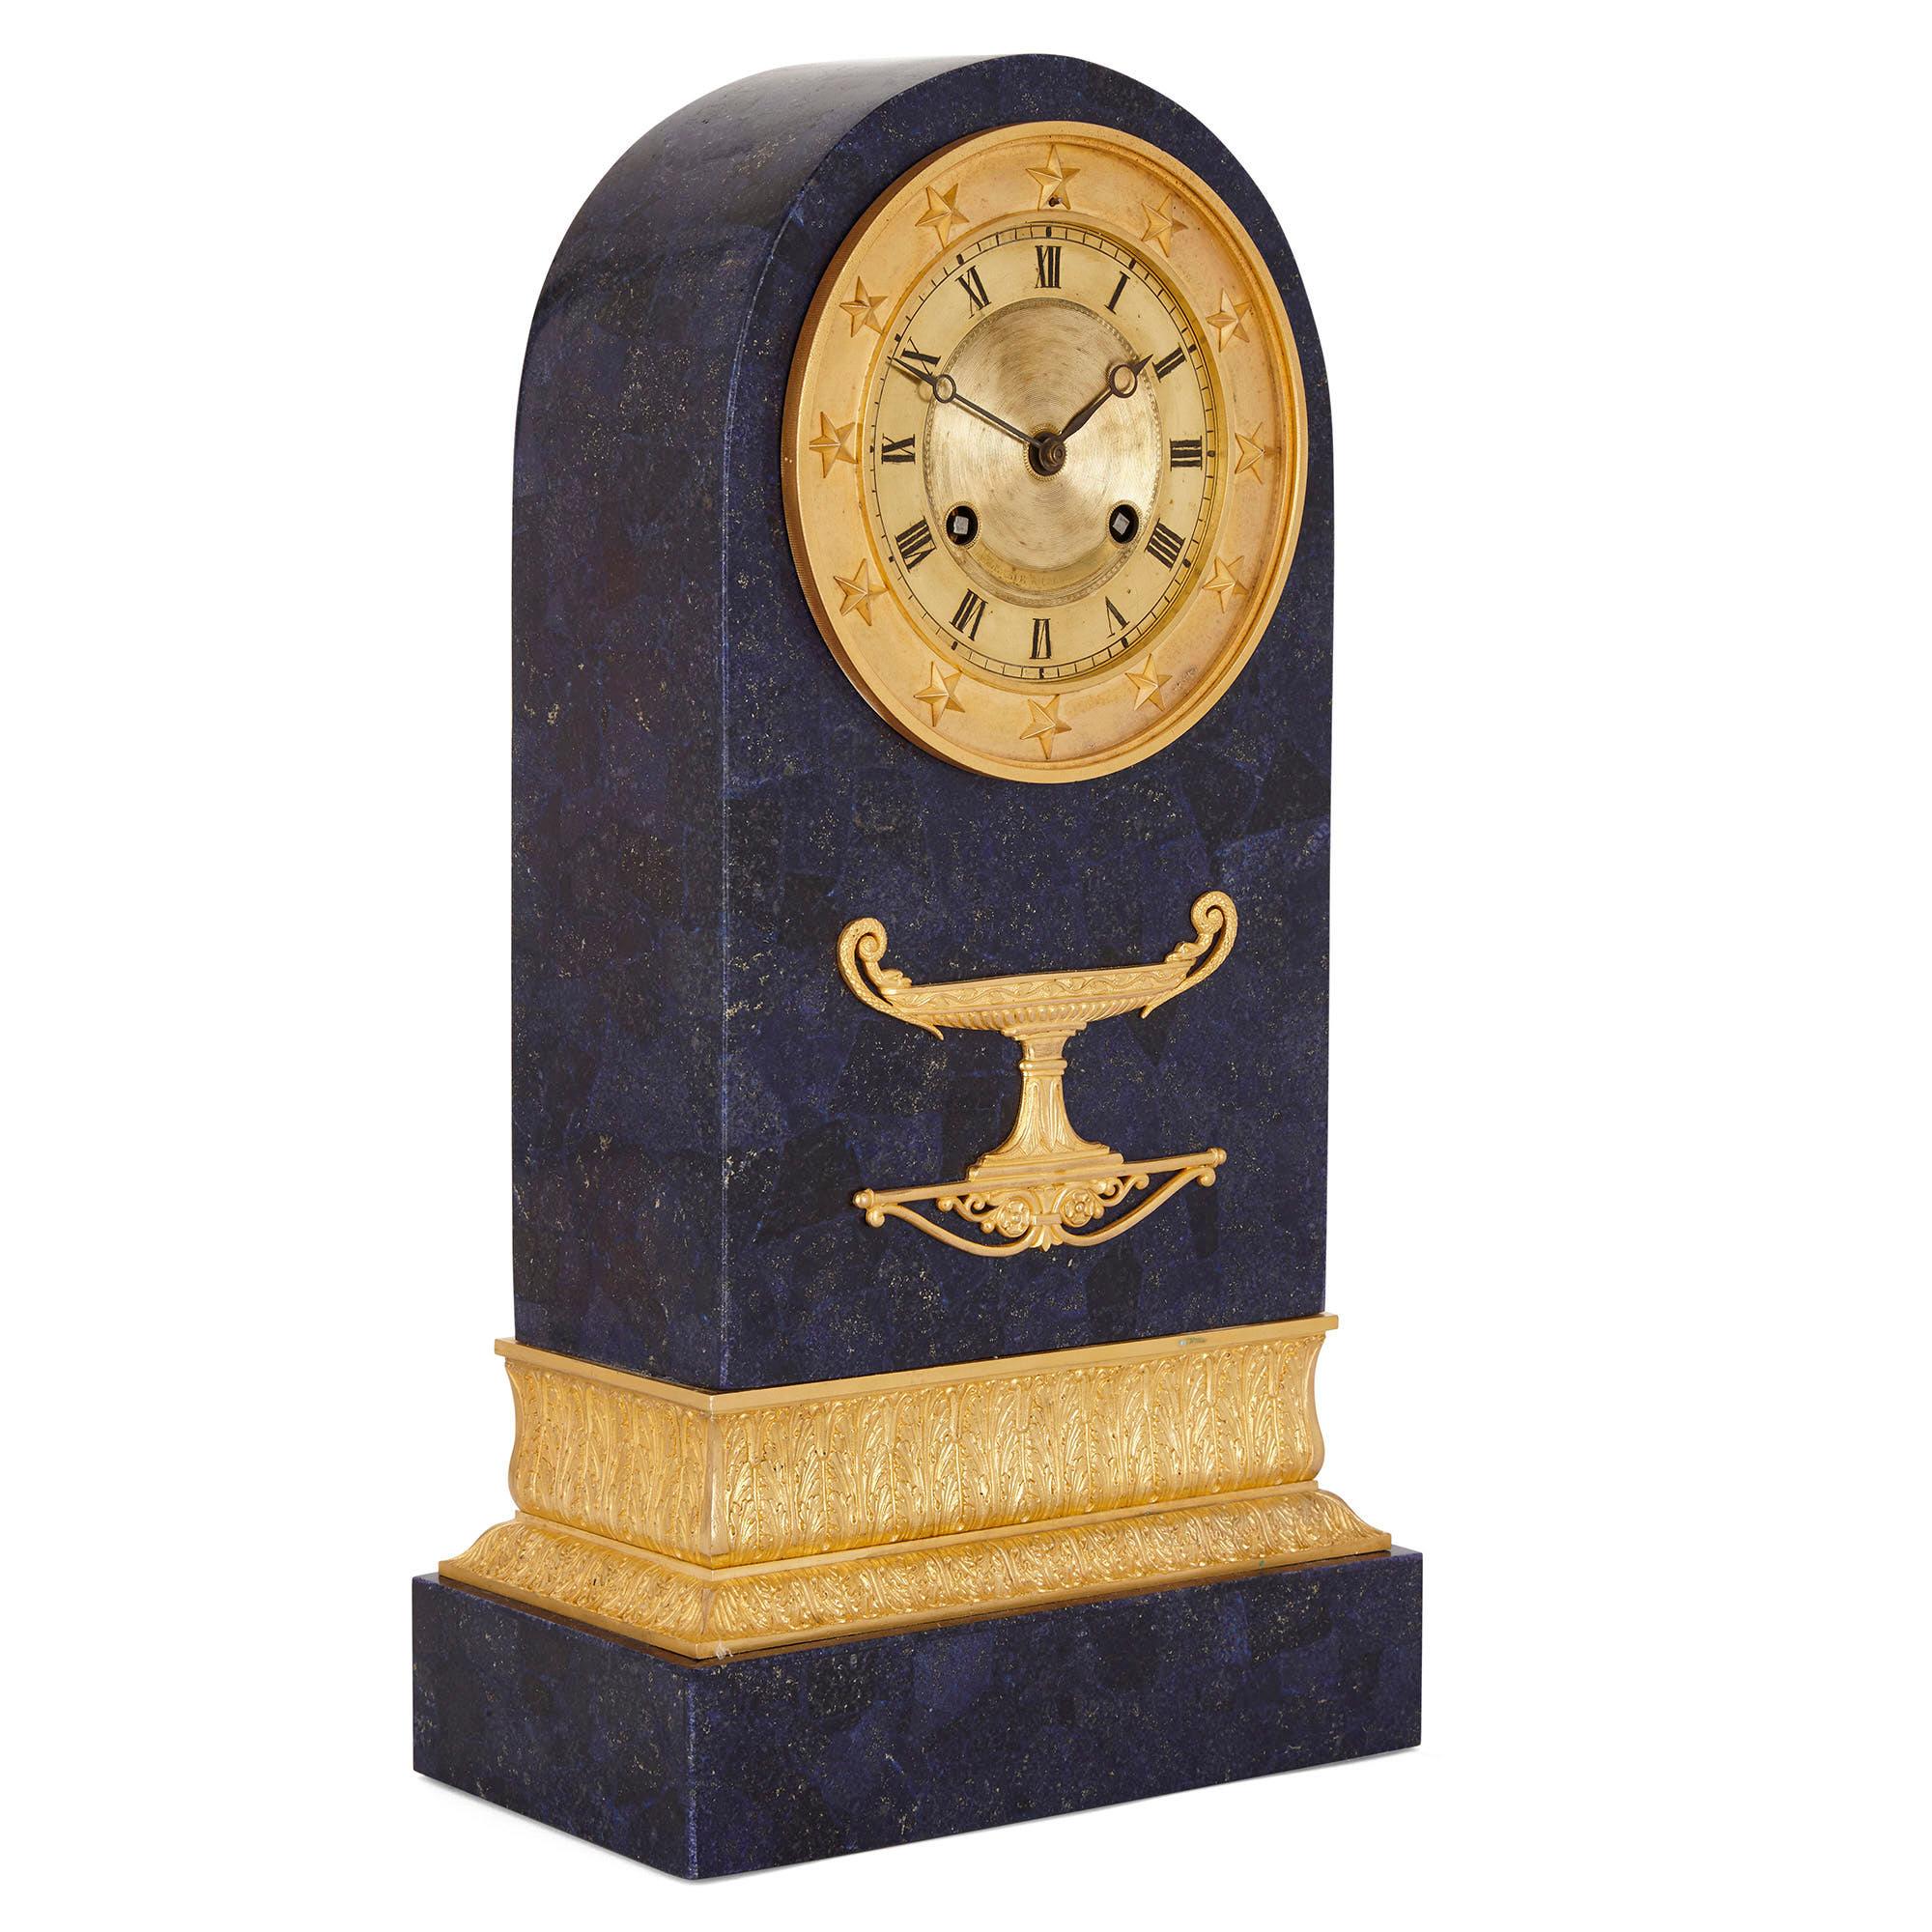 This mantel clock dates from the period of Charles X and is crafted from gilt bronze with a later lapis lazuli veneer. The clock body is columnar in form, having a rectangular profile with a semi-circular top. The body is supported by a gilt bronze